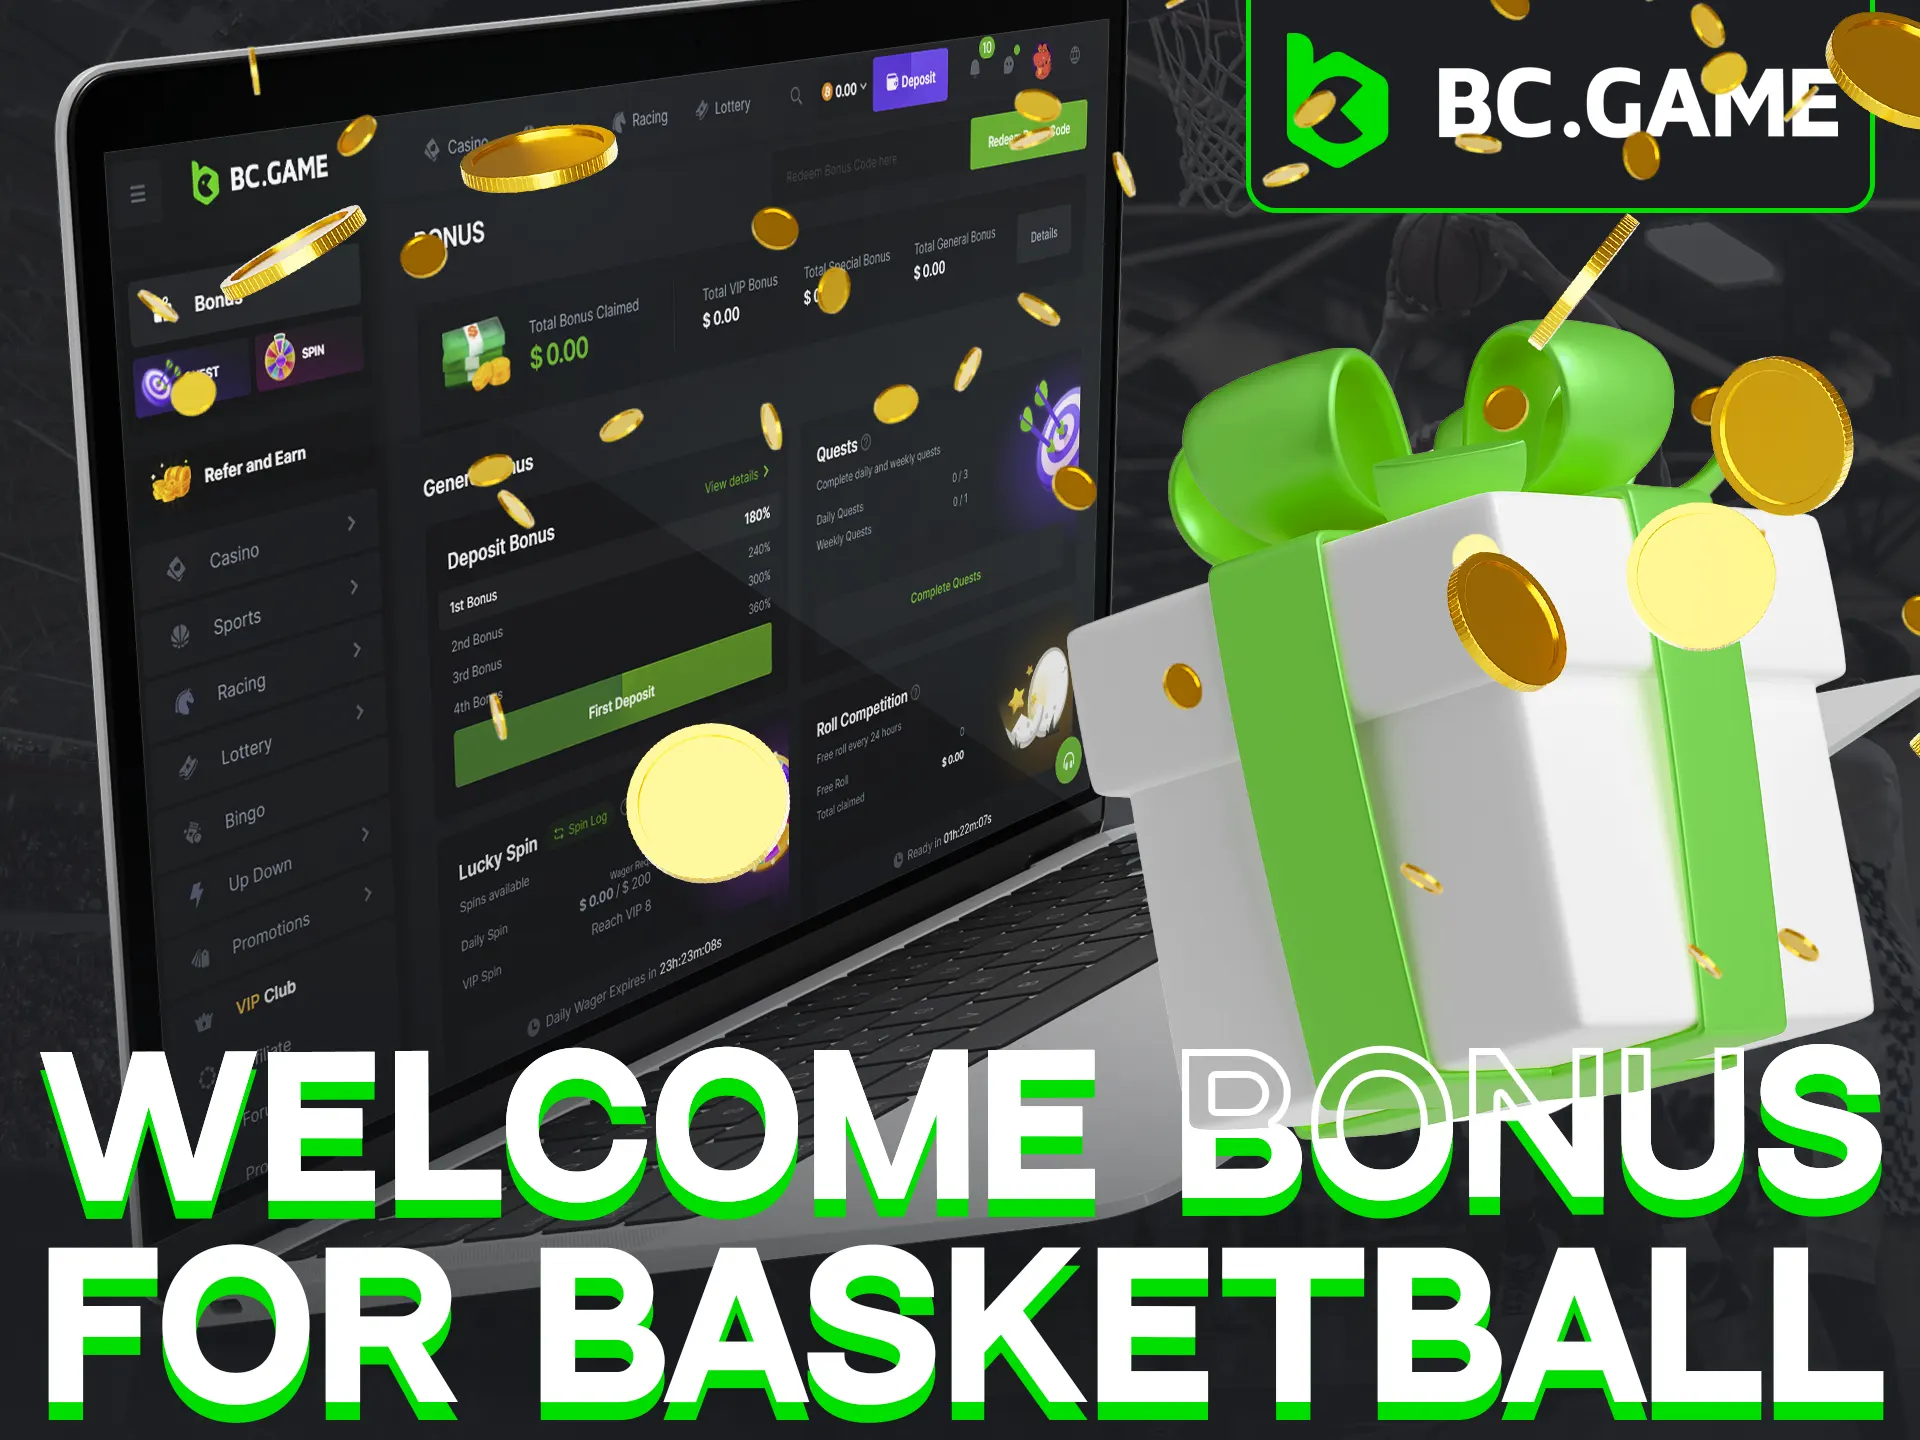 Get a welcome bonus for a basketball bets at BC Game.